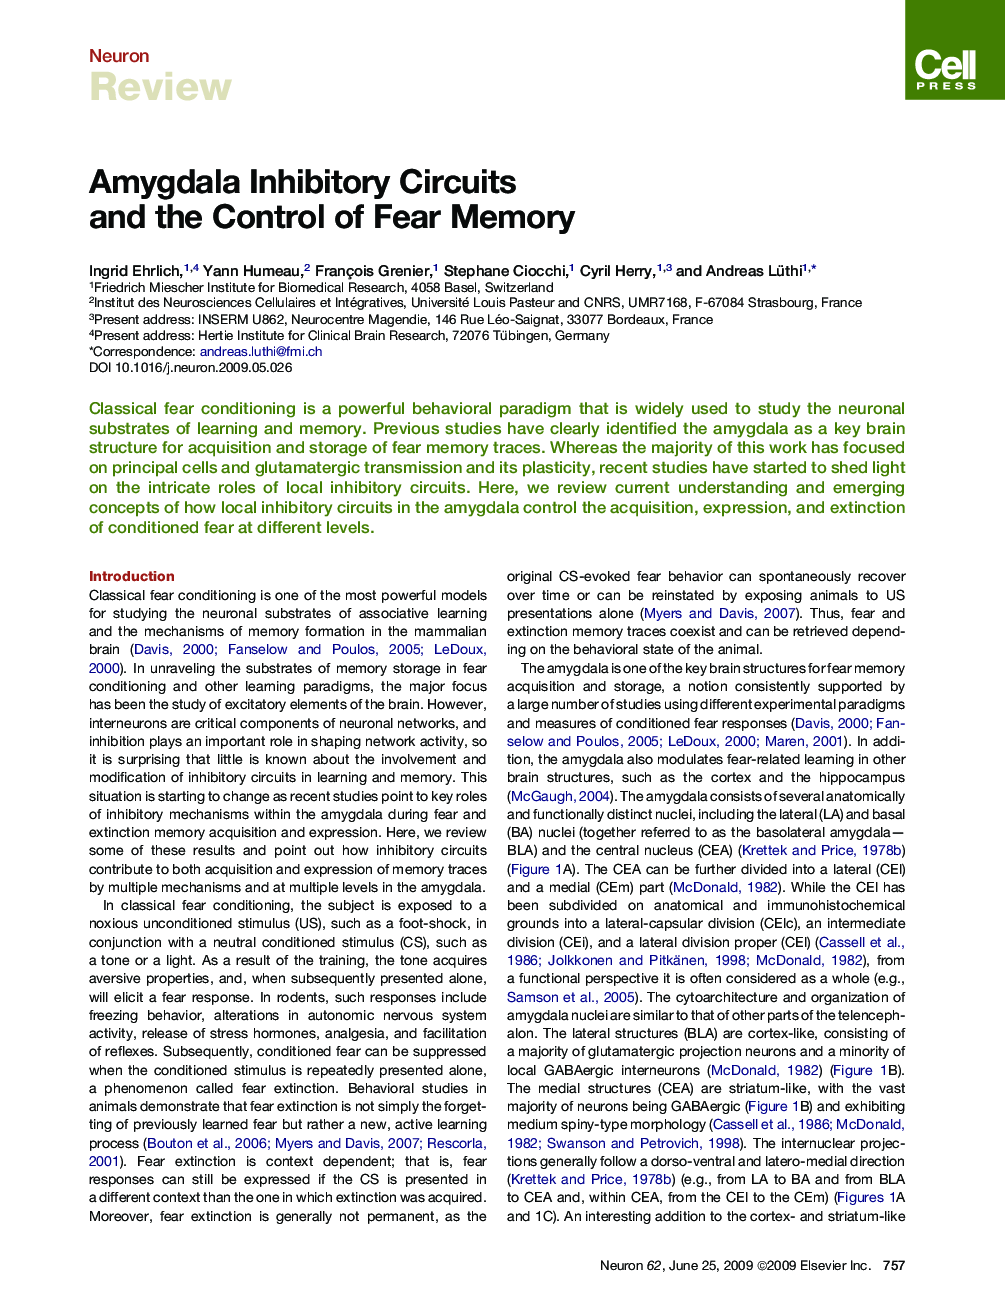 Amygdala Inhibitory Circuits and the Control of Fear Memory